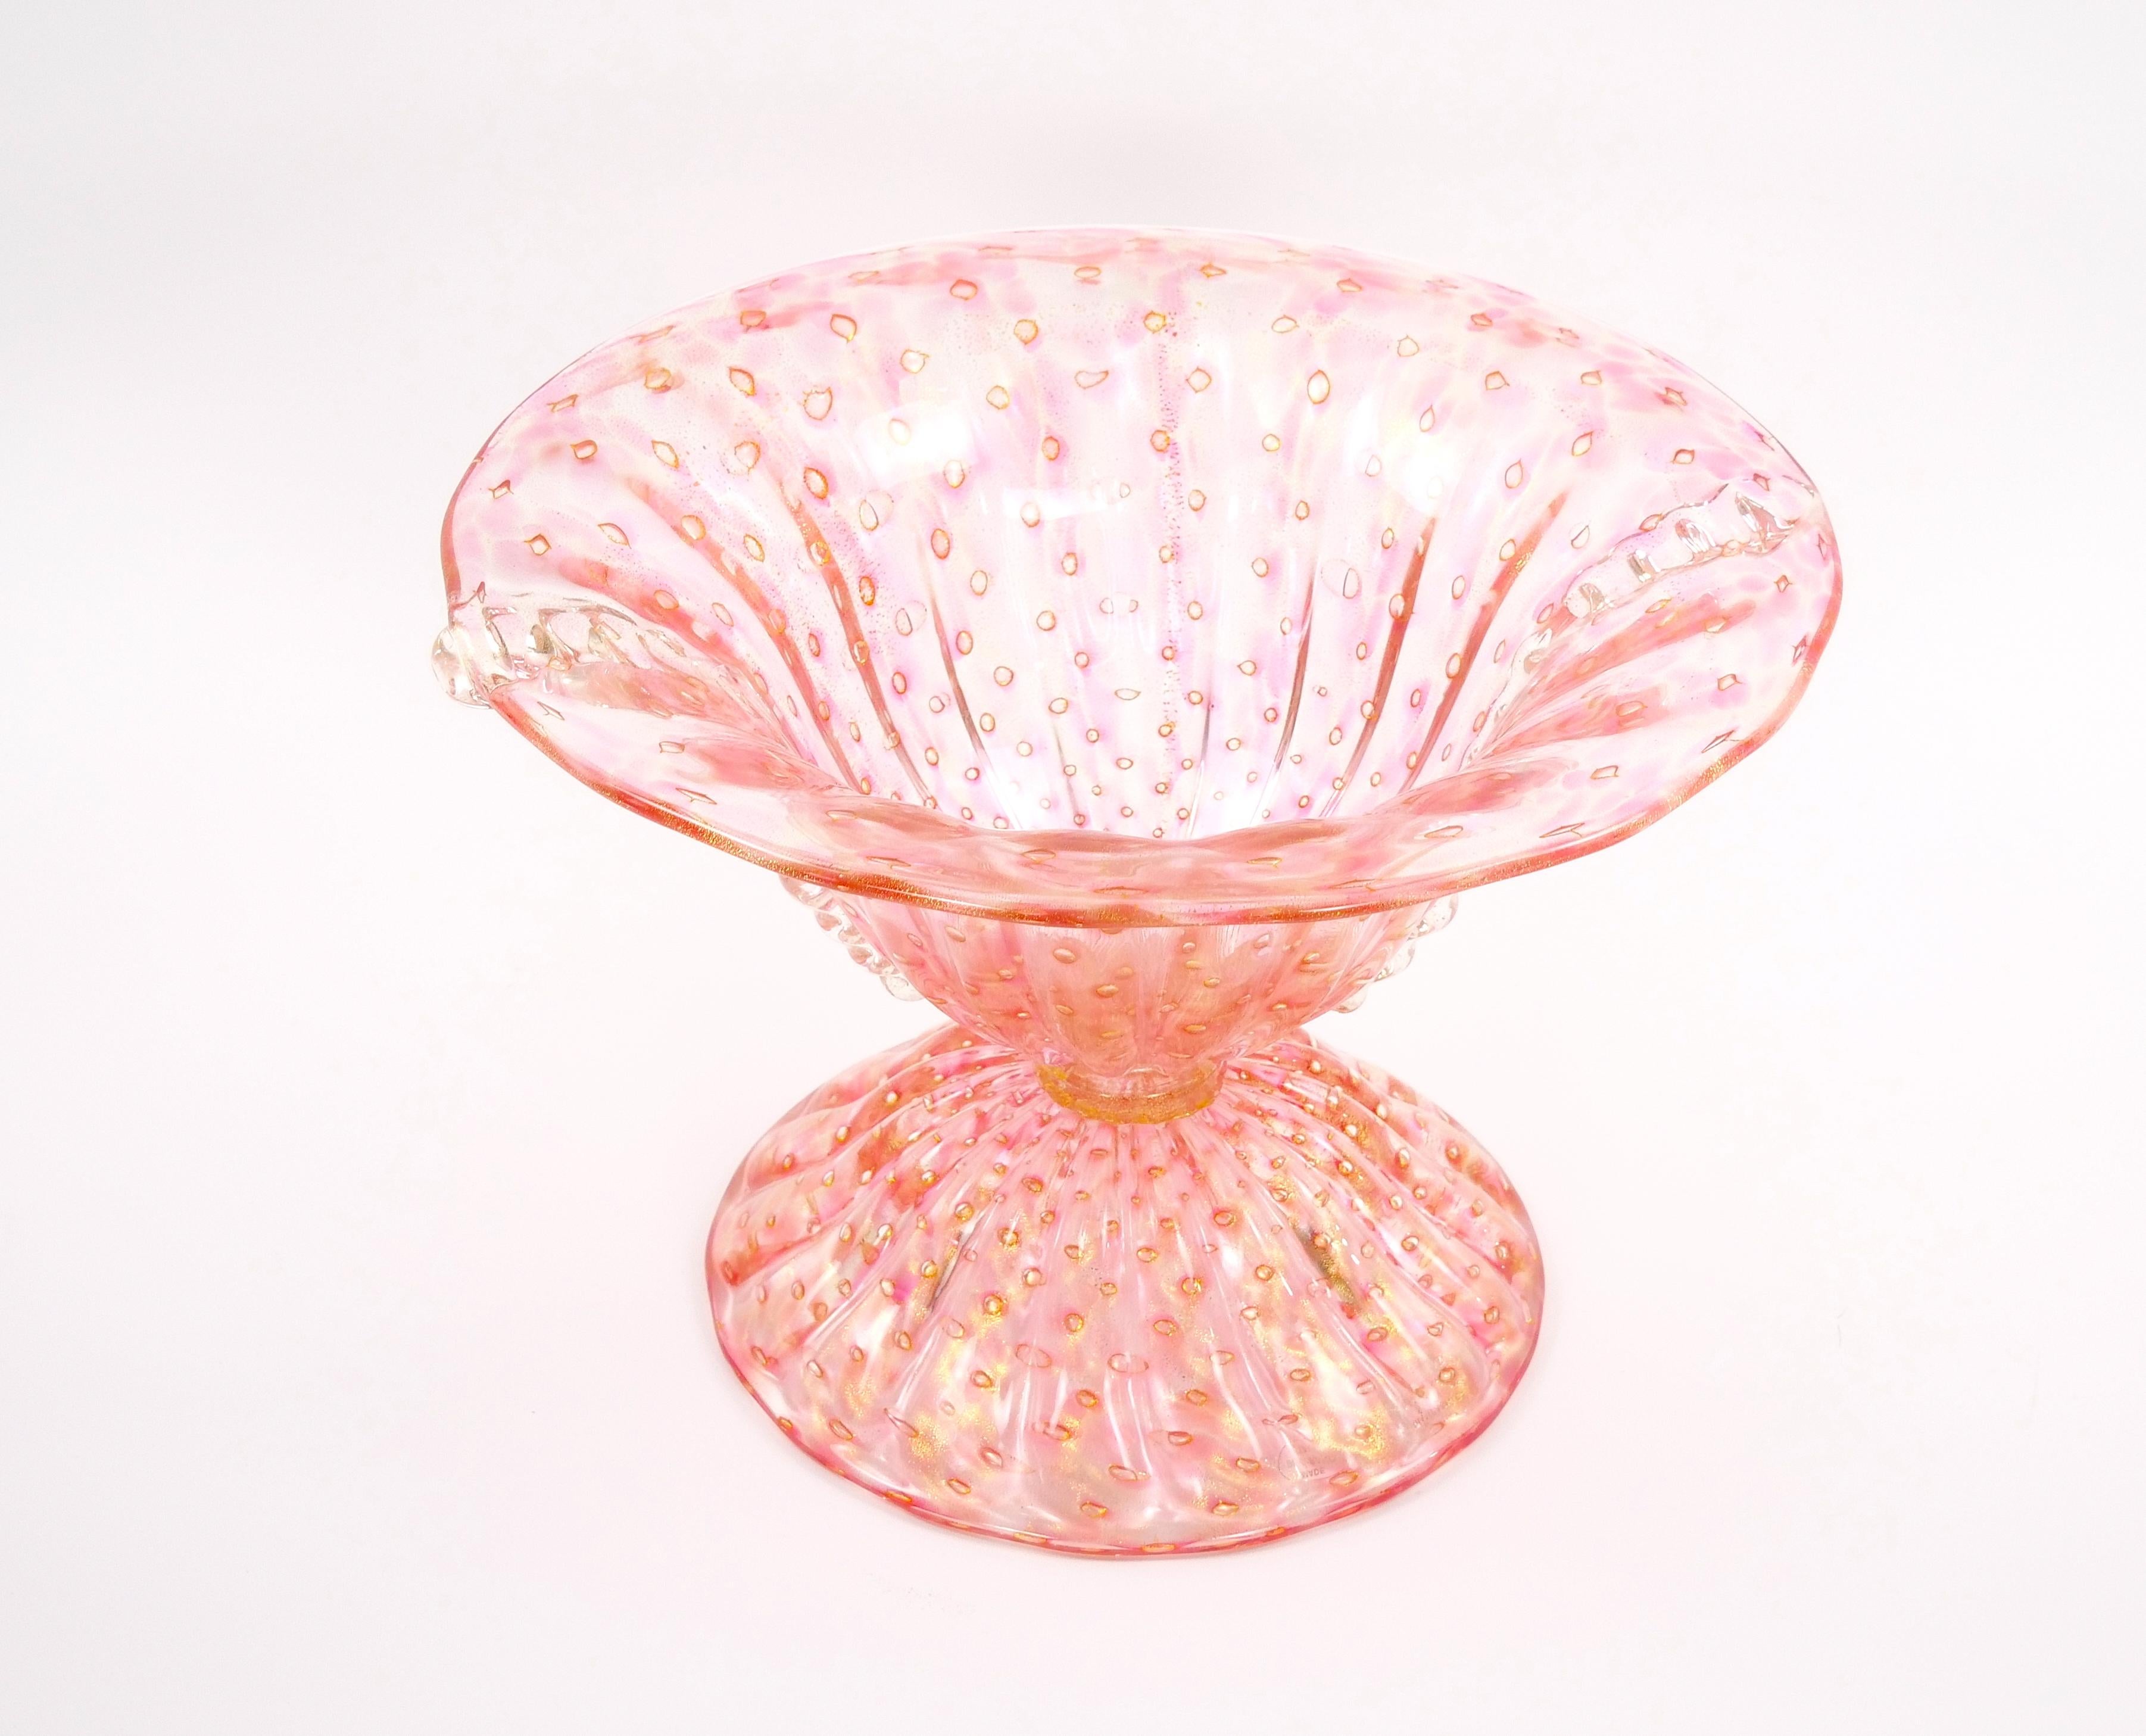 Elevate your table decor with this exquisite and large Murano  Handcrafted and Mouth-Blown Bullicante / Gold Infused Rose-Colored Glass Centerpiece Bowl. This masterful work of art is a testament to the rich tradition of Murano glassmaking and